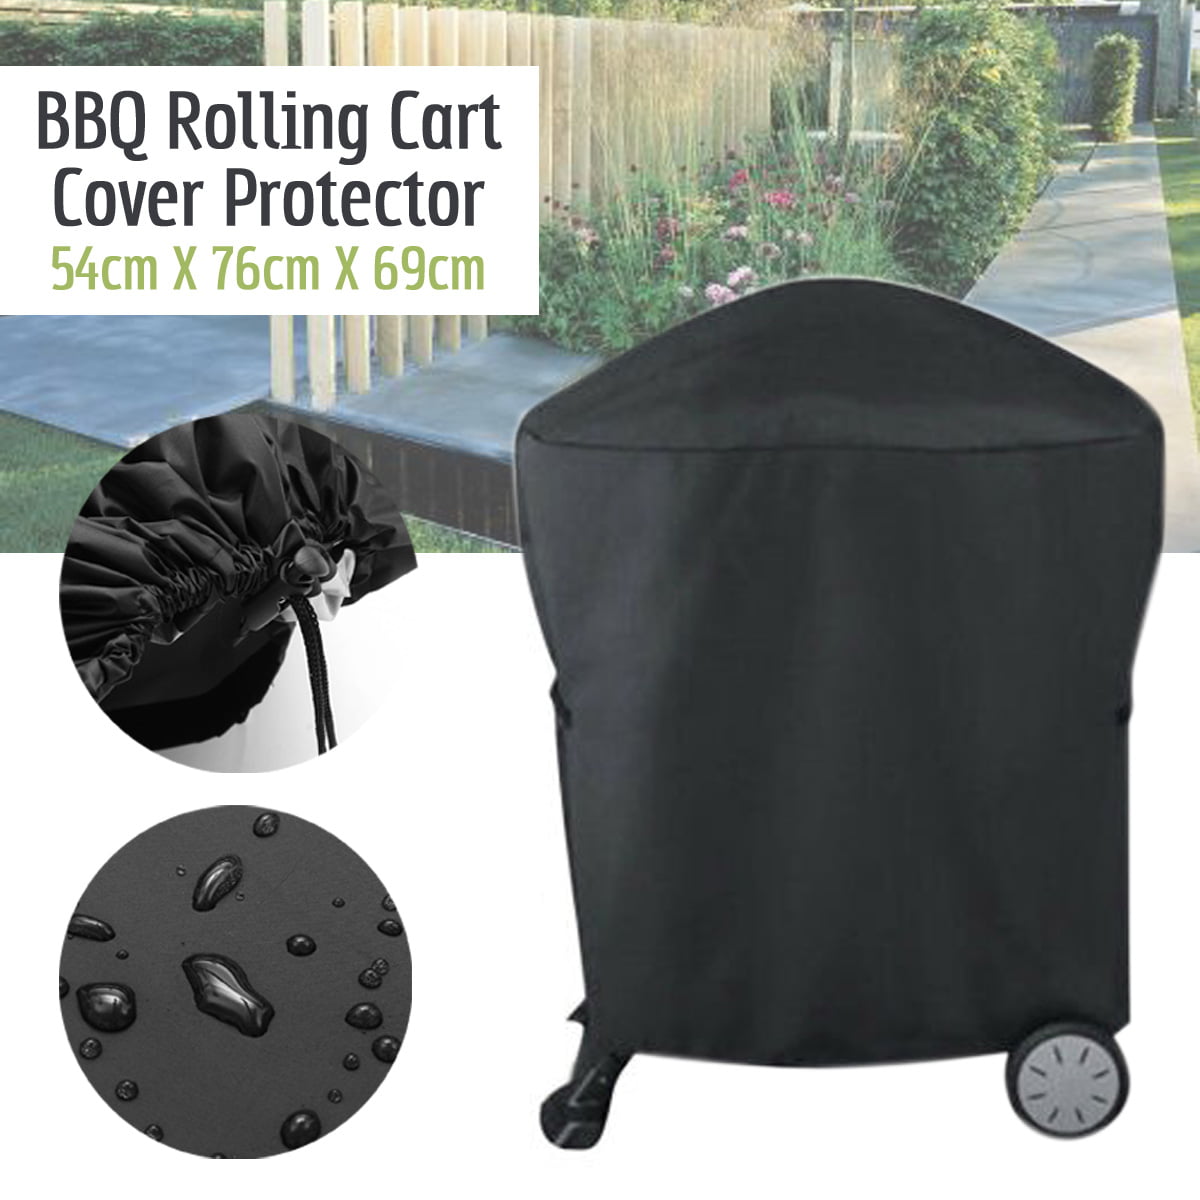 Portable Waterproof Dustdproof Patio Gas BBQ Grill Barbecue Cover Protector S 